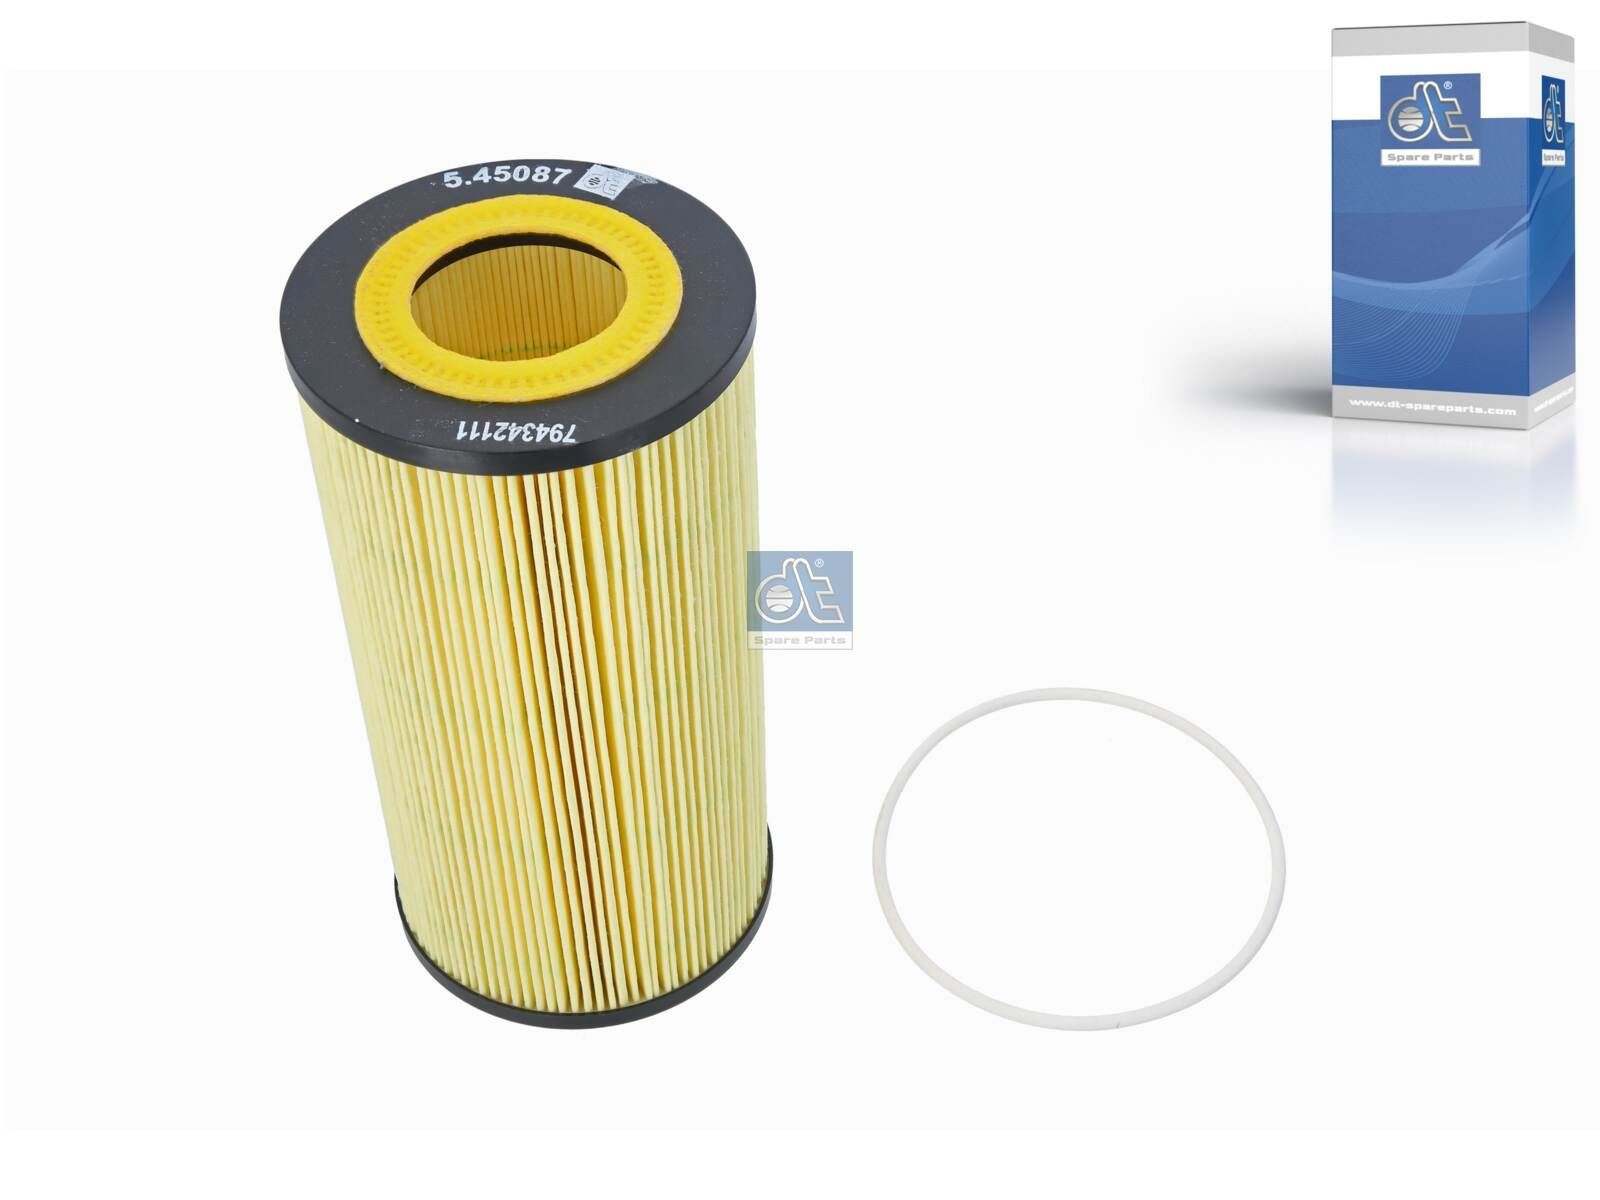 HU 12 103 x DT Spare Parts 5.45087 Oil filter 1526 710